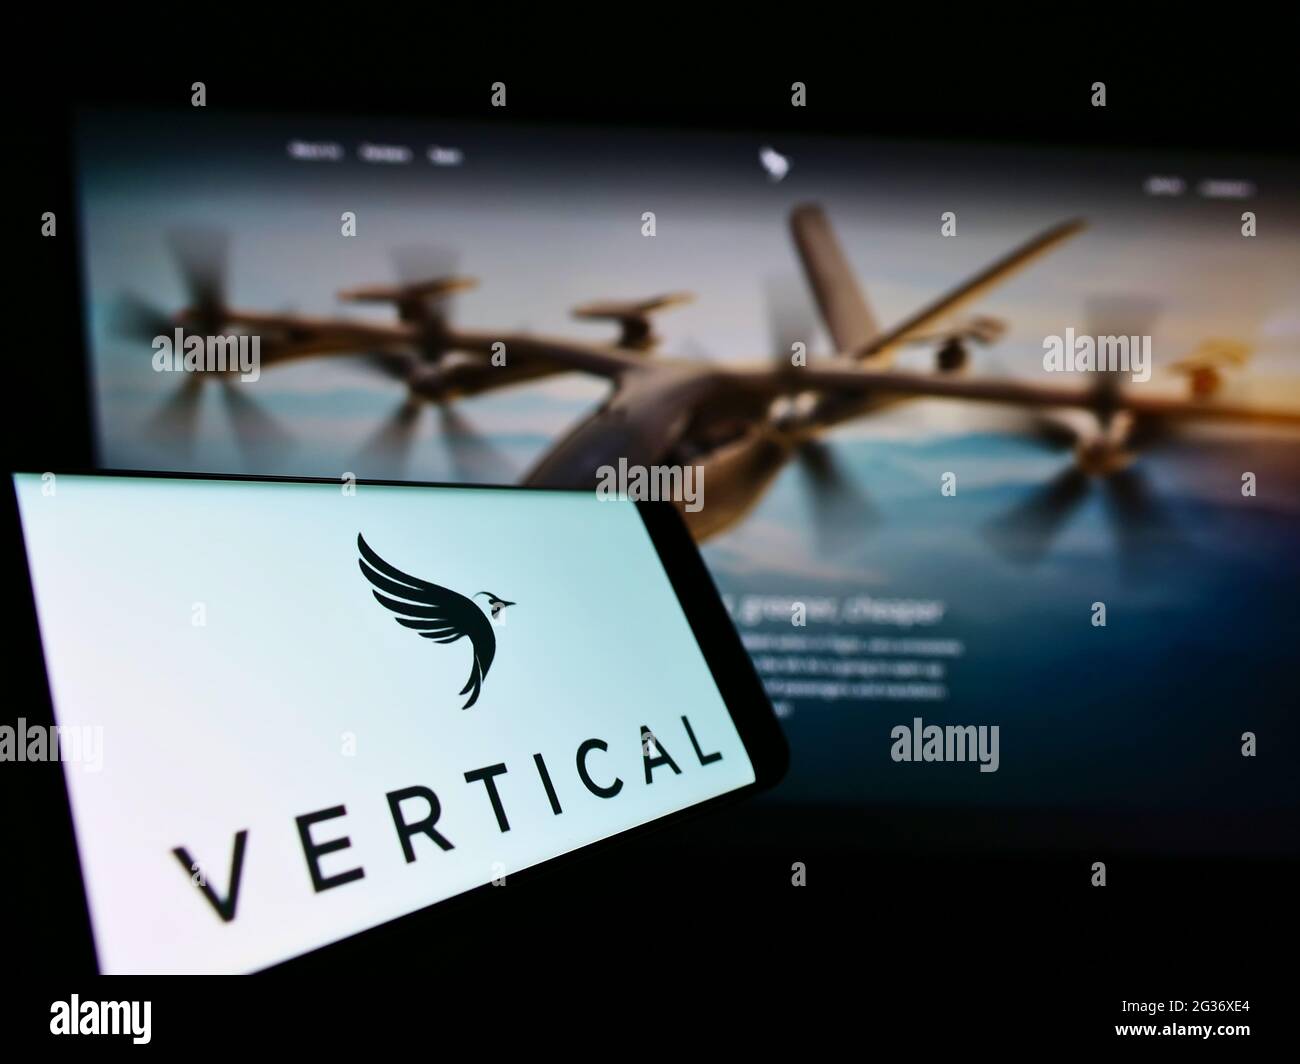 Cellphone with logo of British aircraft company Vertical Aerospace Ltd. on screen in front of website. Focus on center-right of phone display. Stock Photo